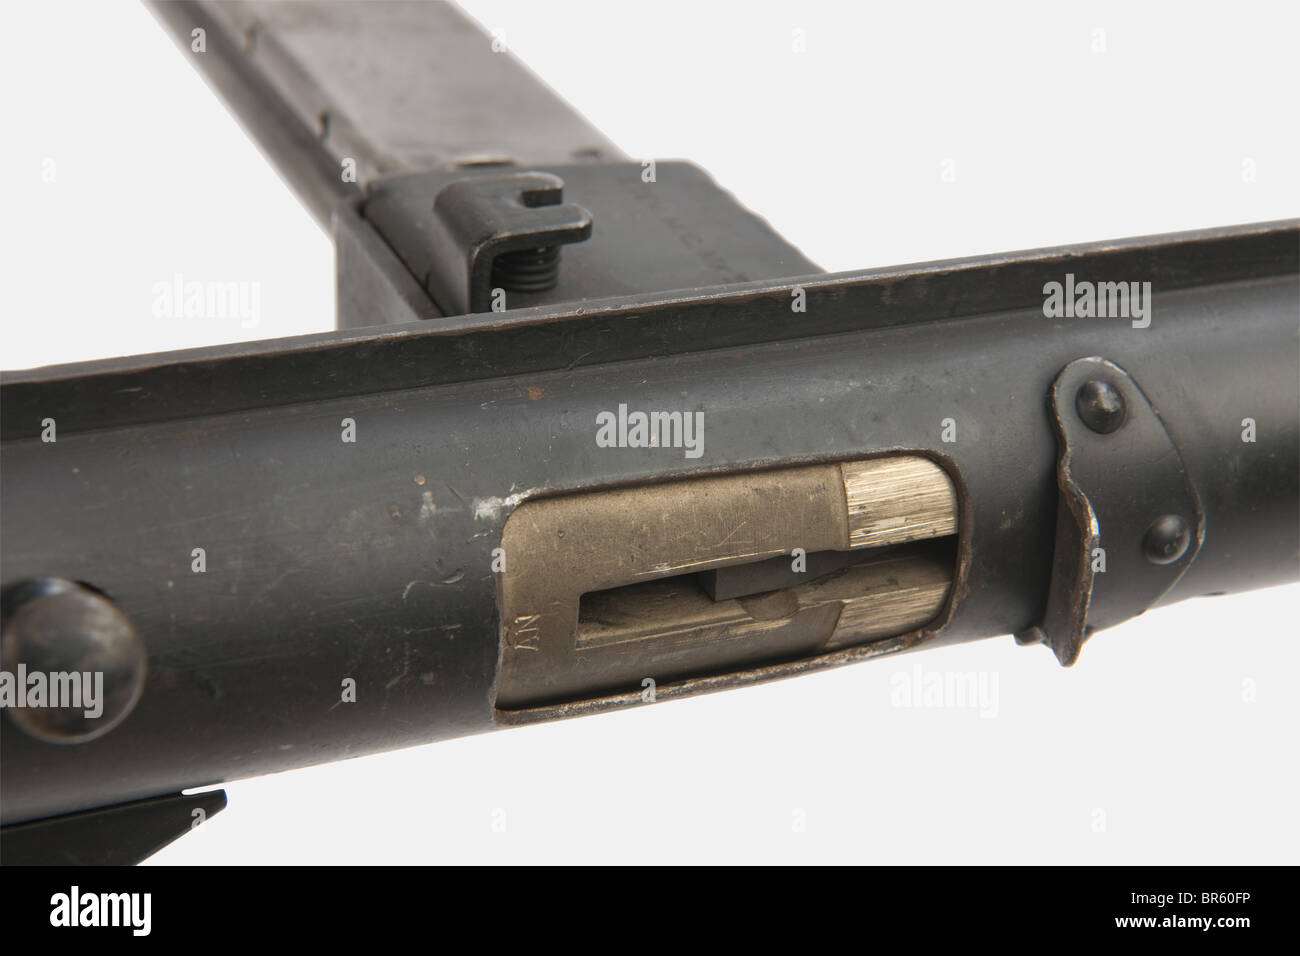 An English submachine gun STEN MK III, calibre 9 x 19, number F 21500 and number 2534 on the trigger guard, stamped 'STEN.MC. MKIII' on the magazine housing, the quite rare bronze bolt with number 2534. Black paint, without its sling. historic, historical, 1930s, 20th century, gun, guns, firearm, fire arm, firearms, fire arms, weapons, arms, weapon, arm, fighting device, object, objects, stills, clipping, clippings, cut out, cut-out, cut-outs, military, militaria, piece of equipment, Stock Photo